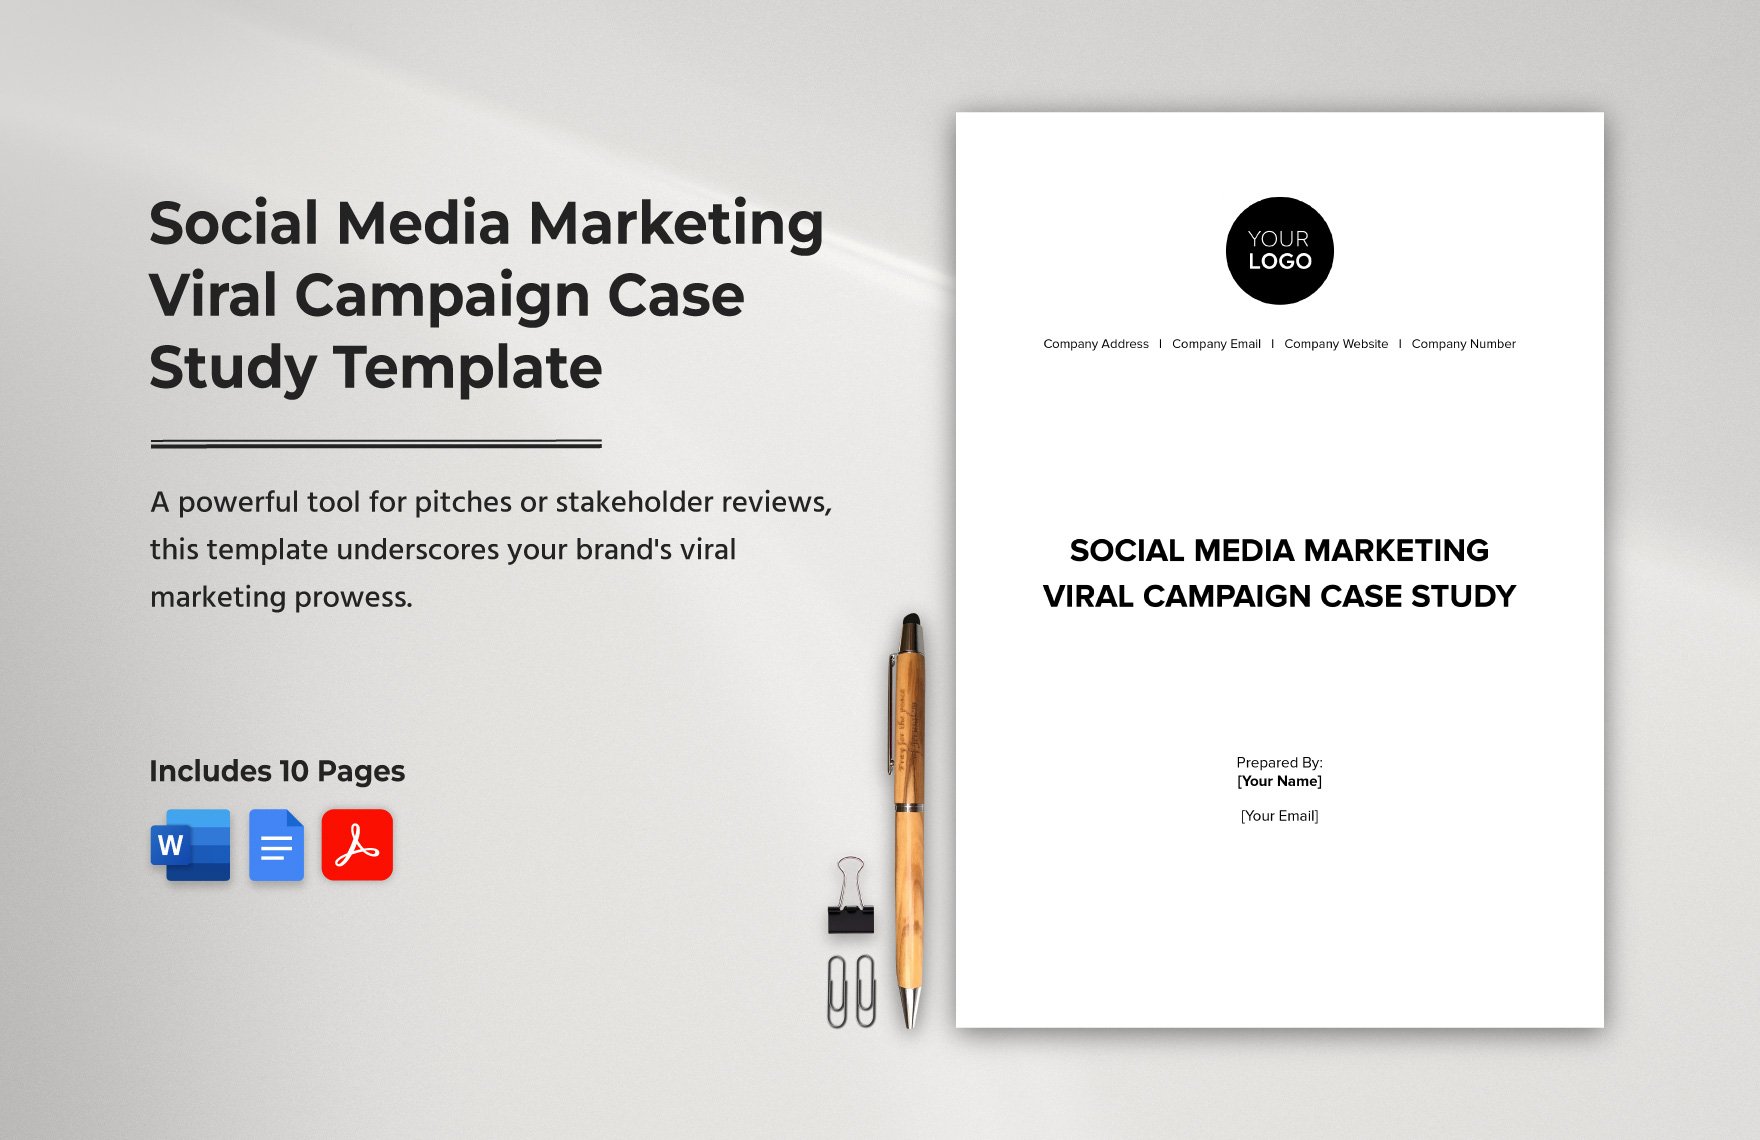 Social Media Marketing Viral Campaign Case Study Template in Word, Google Docs, PDF